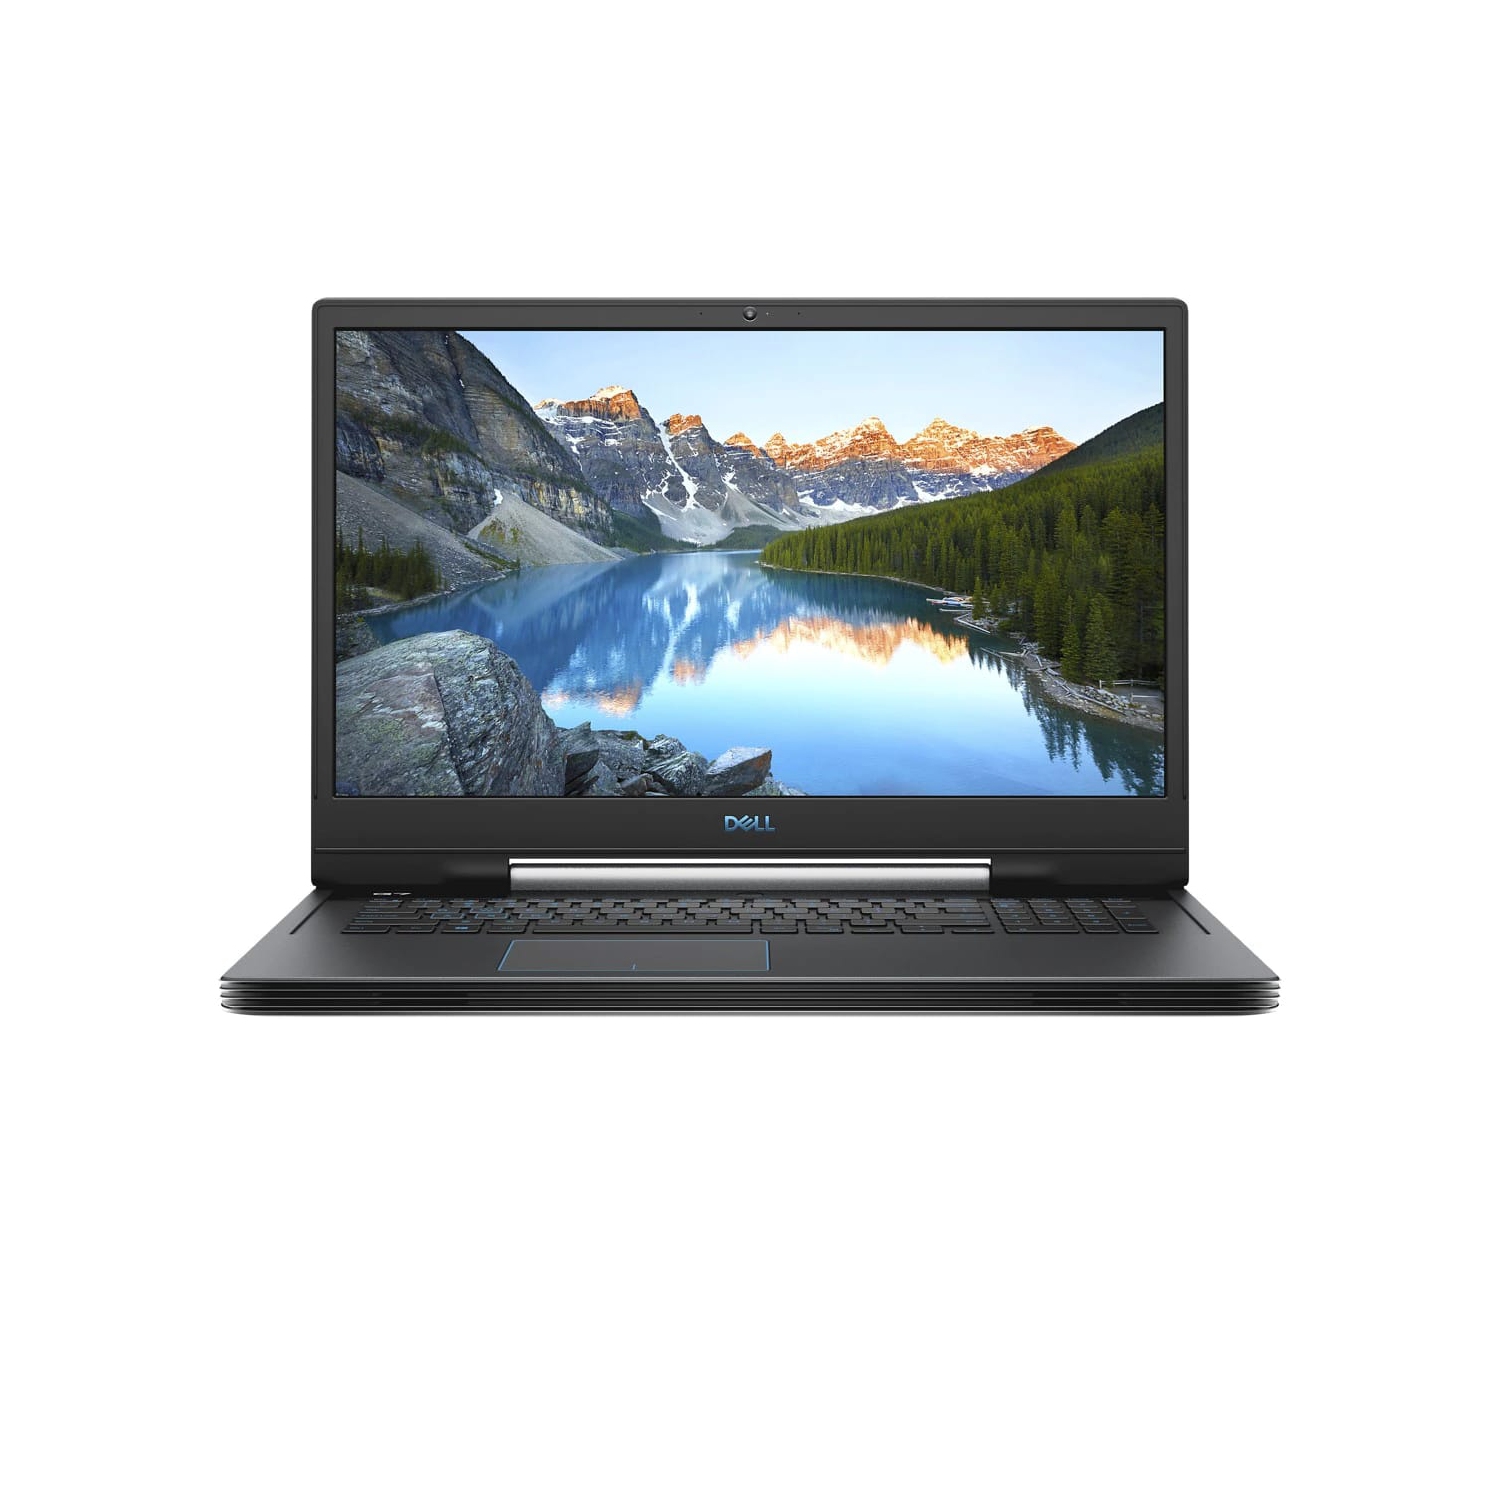 Refurbished (Excellent) – Dell G7 7790 Gaming Laptop (2019) | 17.3" FHD | Core i5 - 512GB SSD + 1TB HDD - 32GB RAM - RTX 2060 | 4 Cores @ 4.1 GHz - 6GB GDDR6